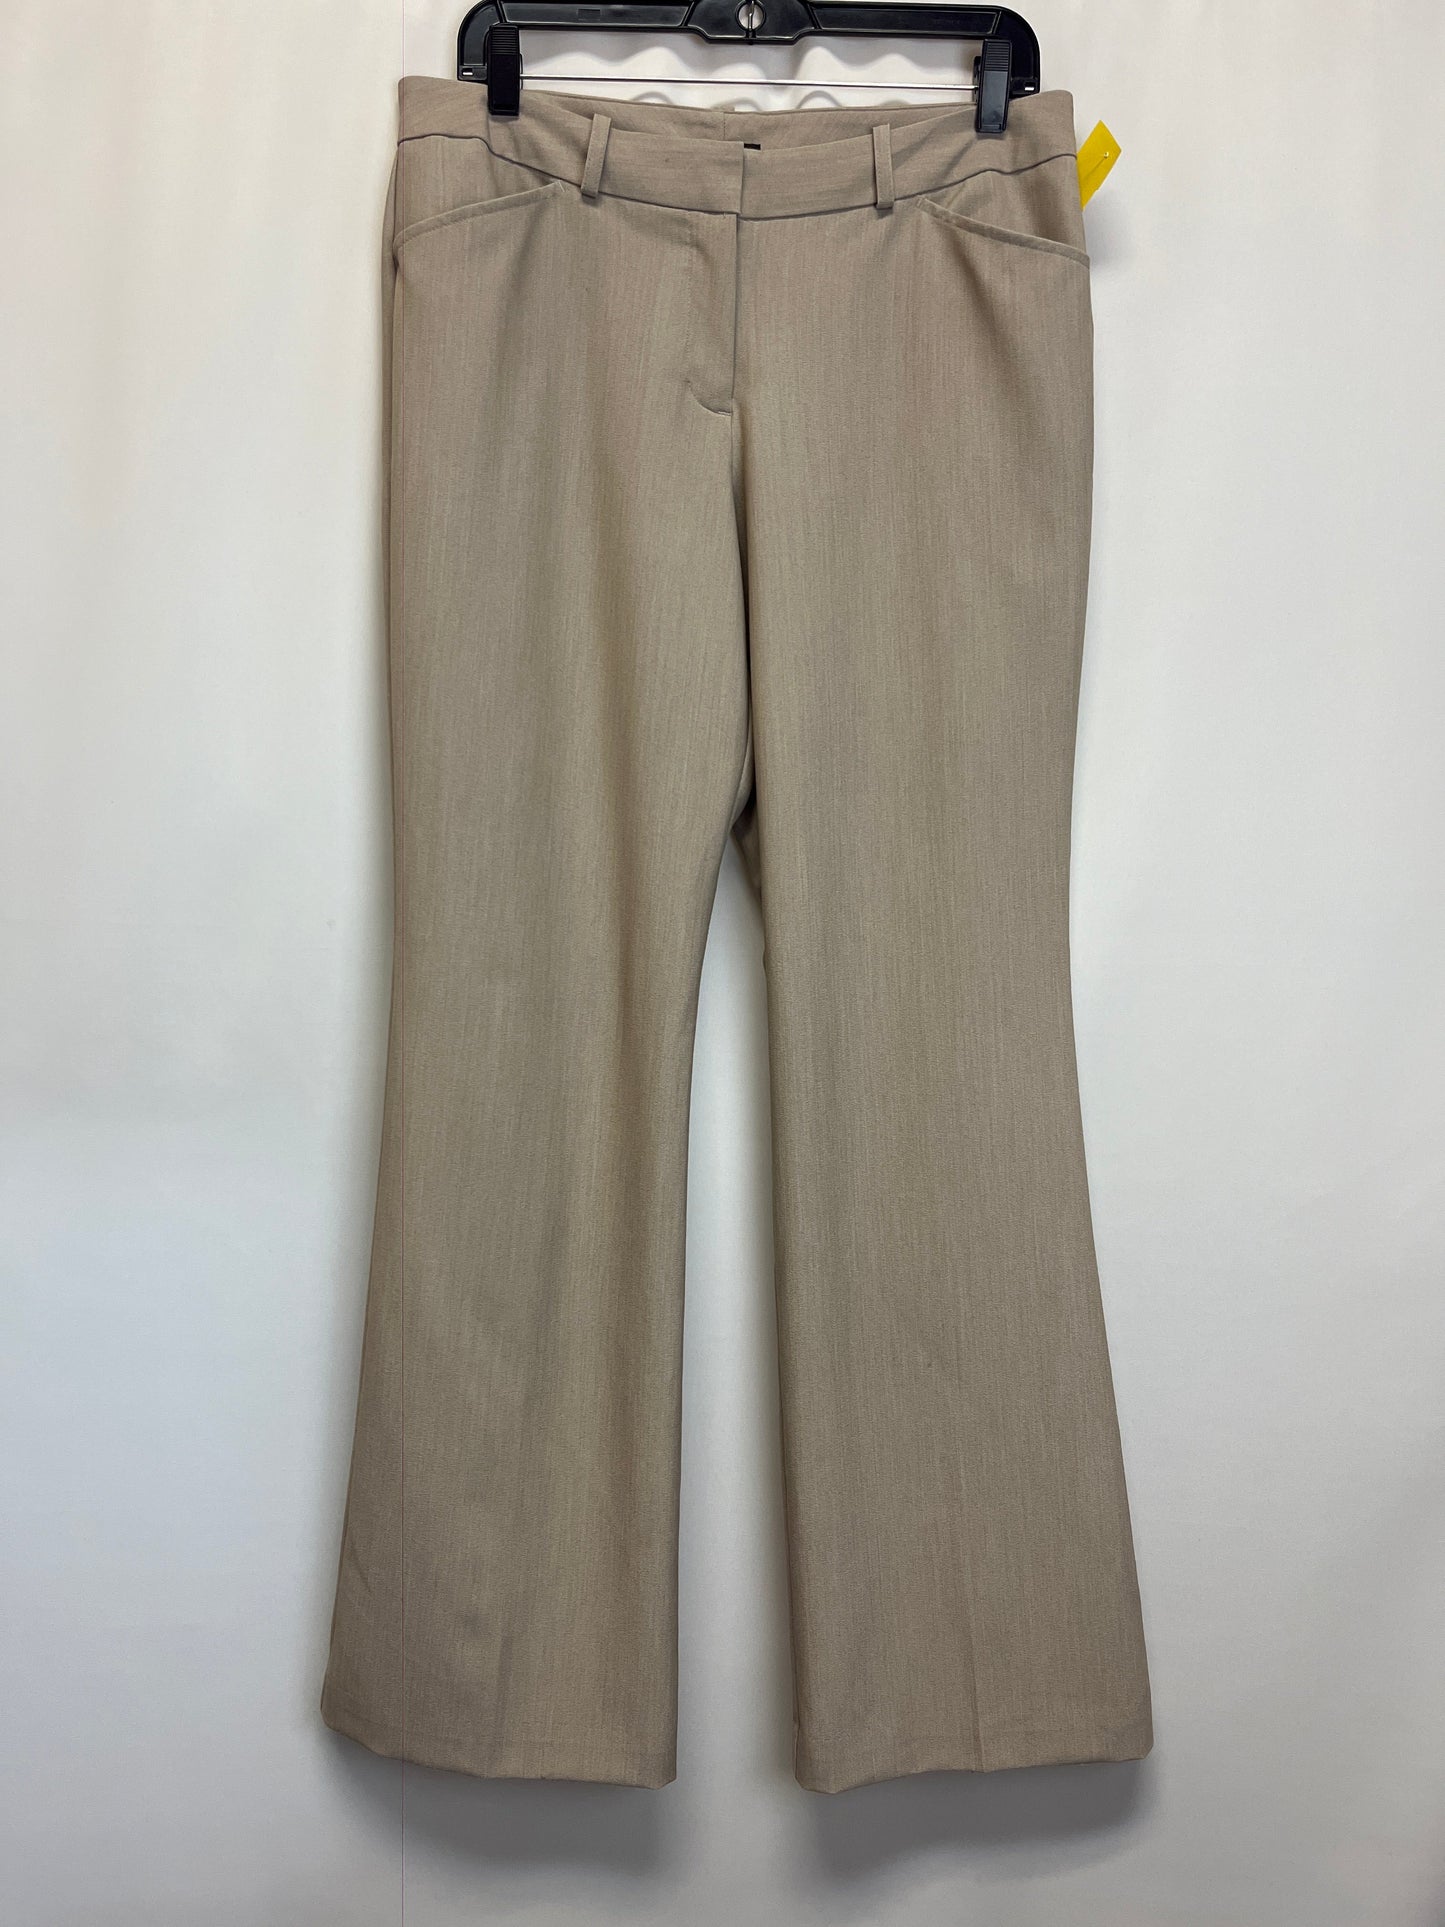 Pants Ankle By Worthington  Size: 10